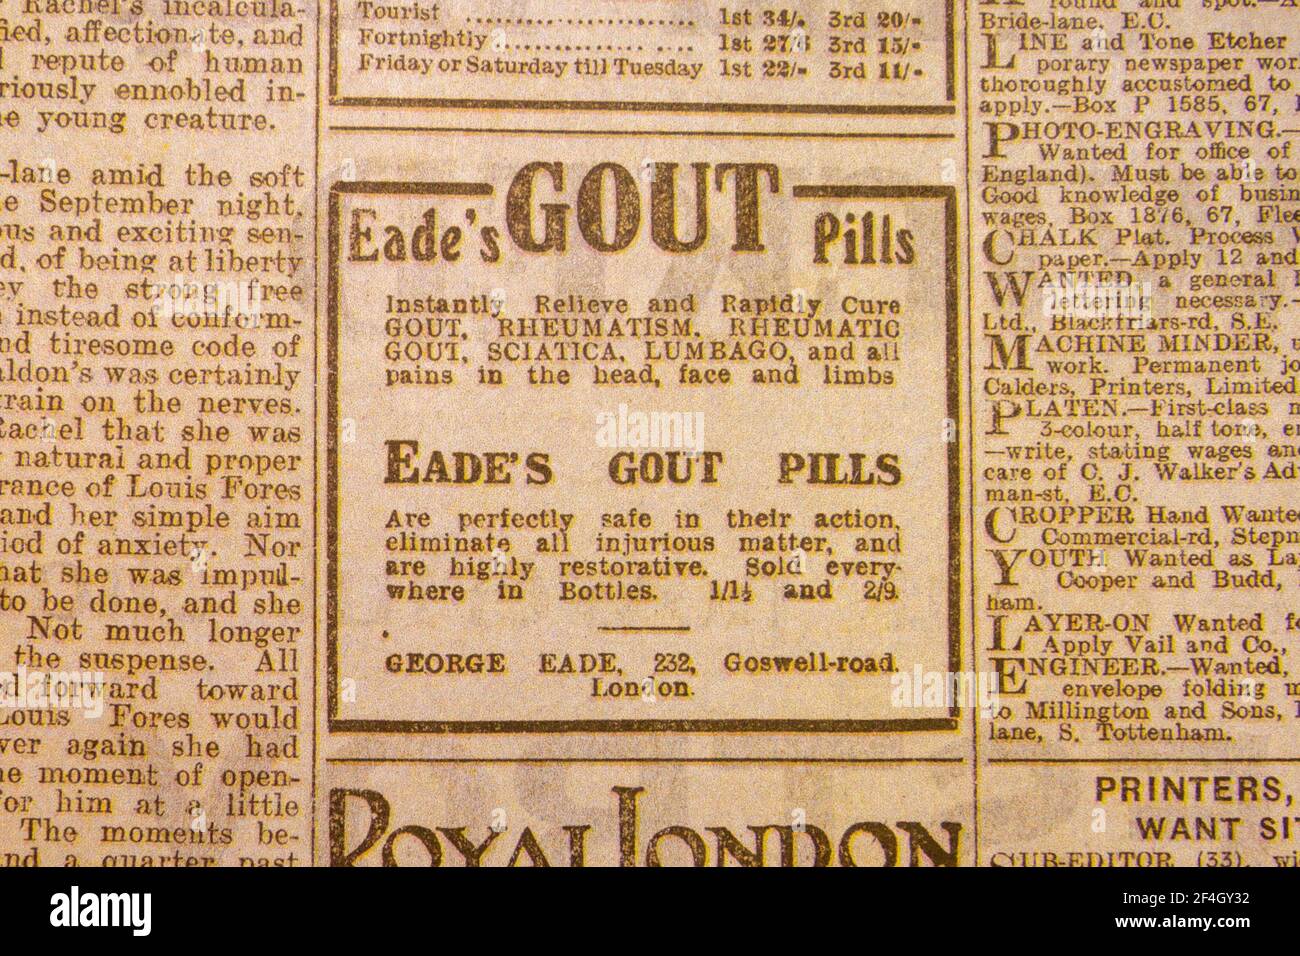 Advert for Eade's Gout Pills in the Daily News & Reader newspaper on 5th Aug 1914. Stock Photo